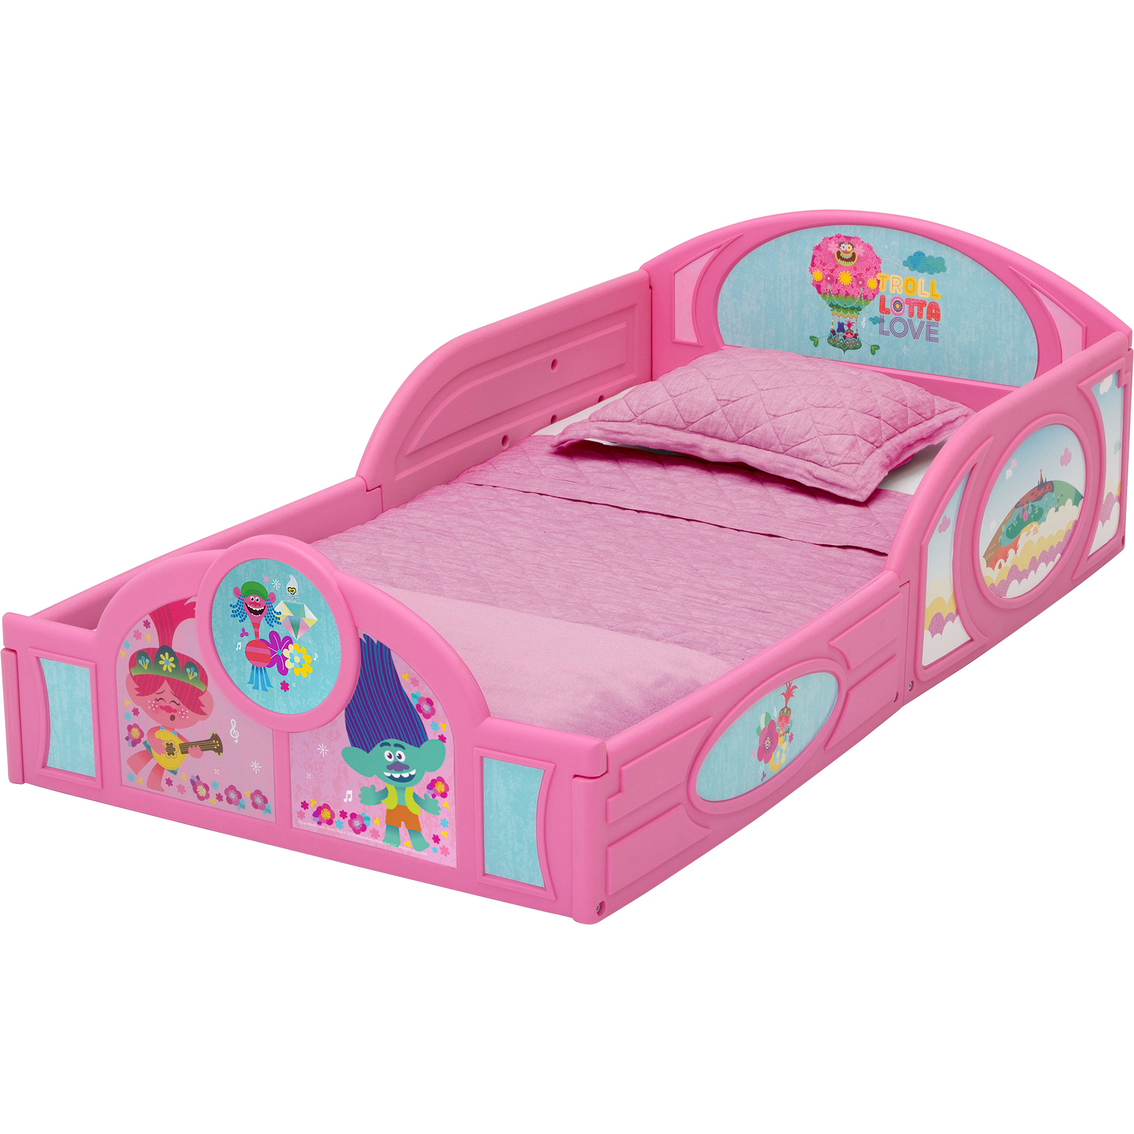 Delta Children Trolls World Tour Plastic Sleep and Play Toddler Bed - Image 7 of 9